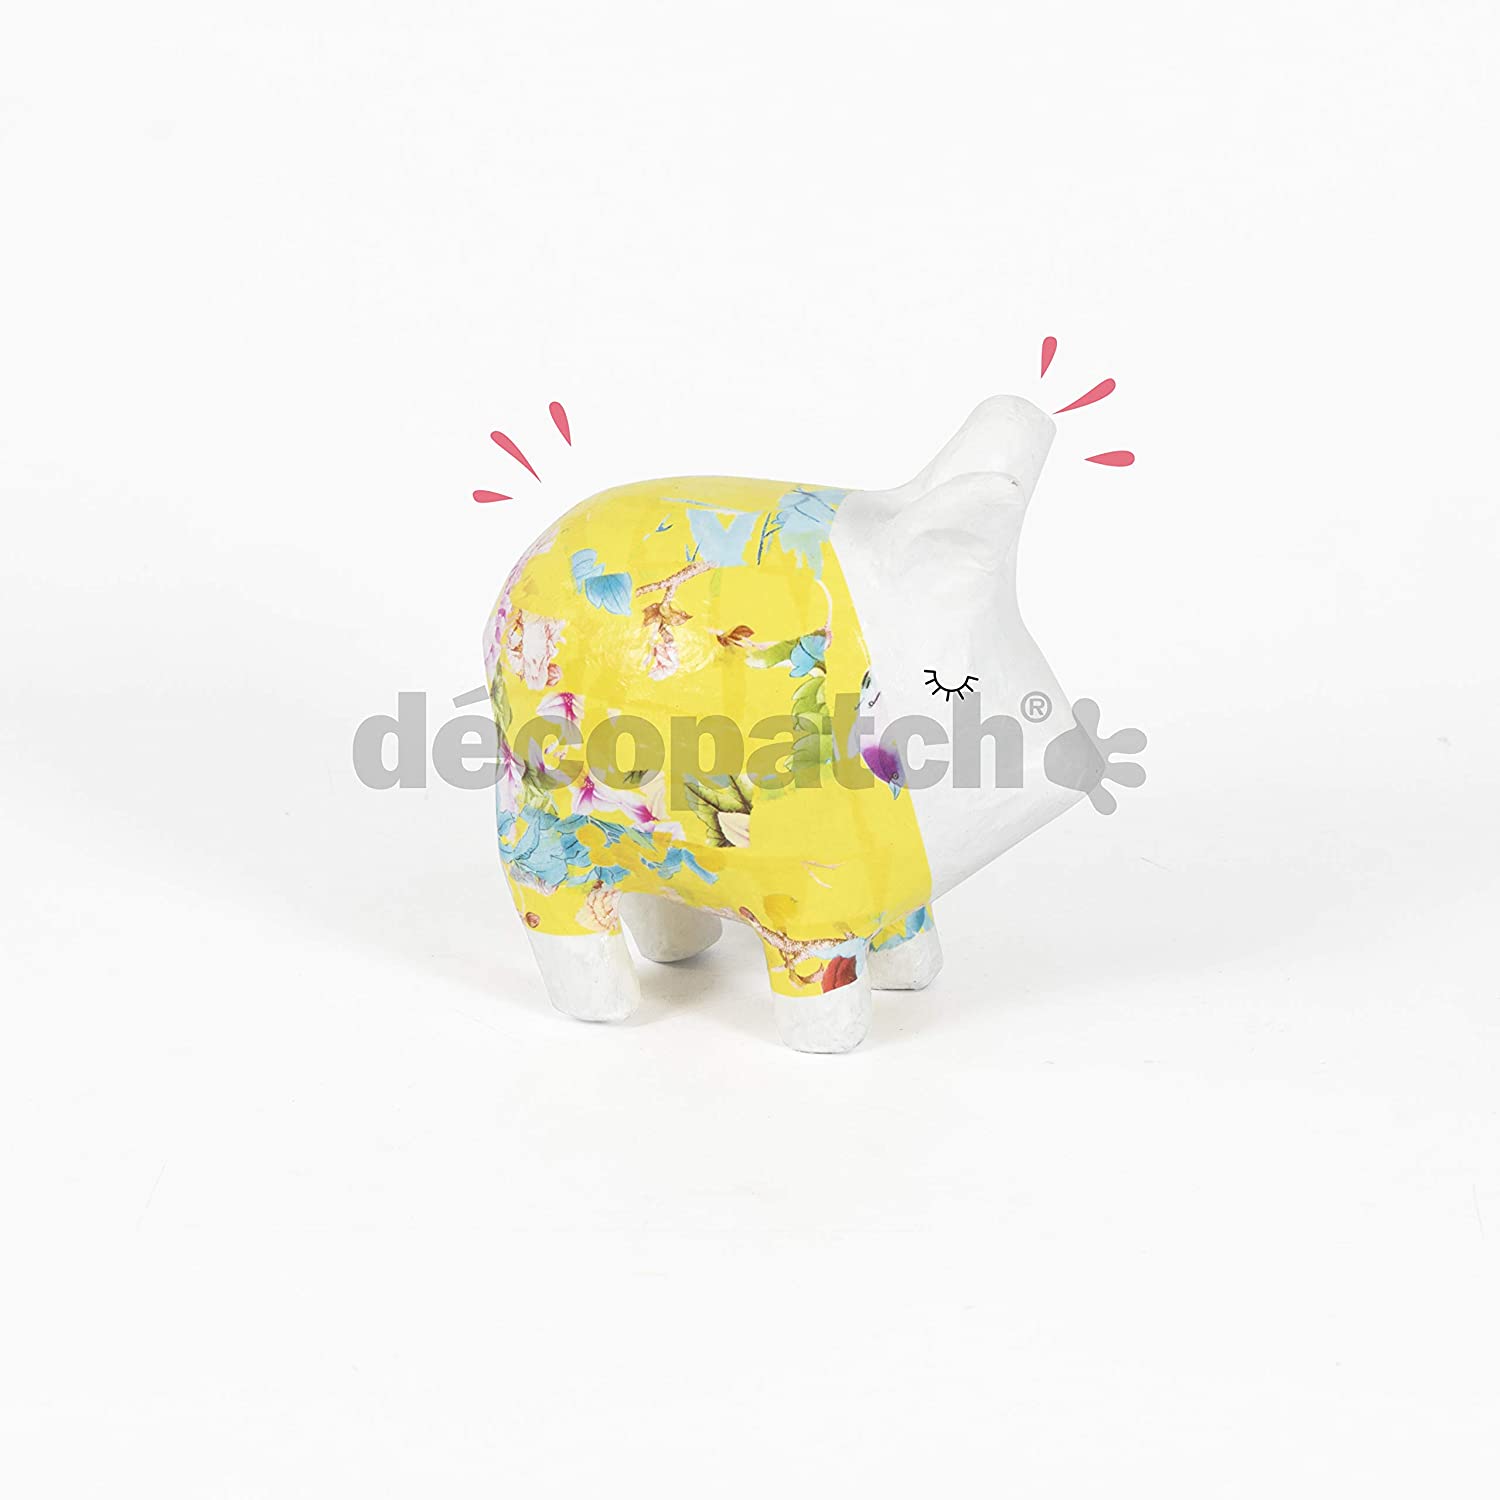 DECOPATCH Objects:Small-Horoscope Pig Default Title